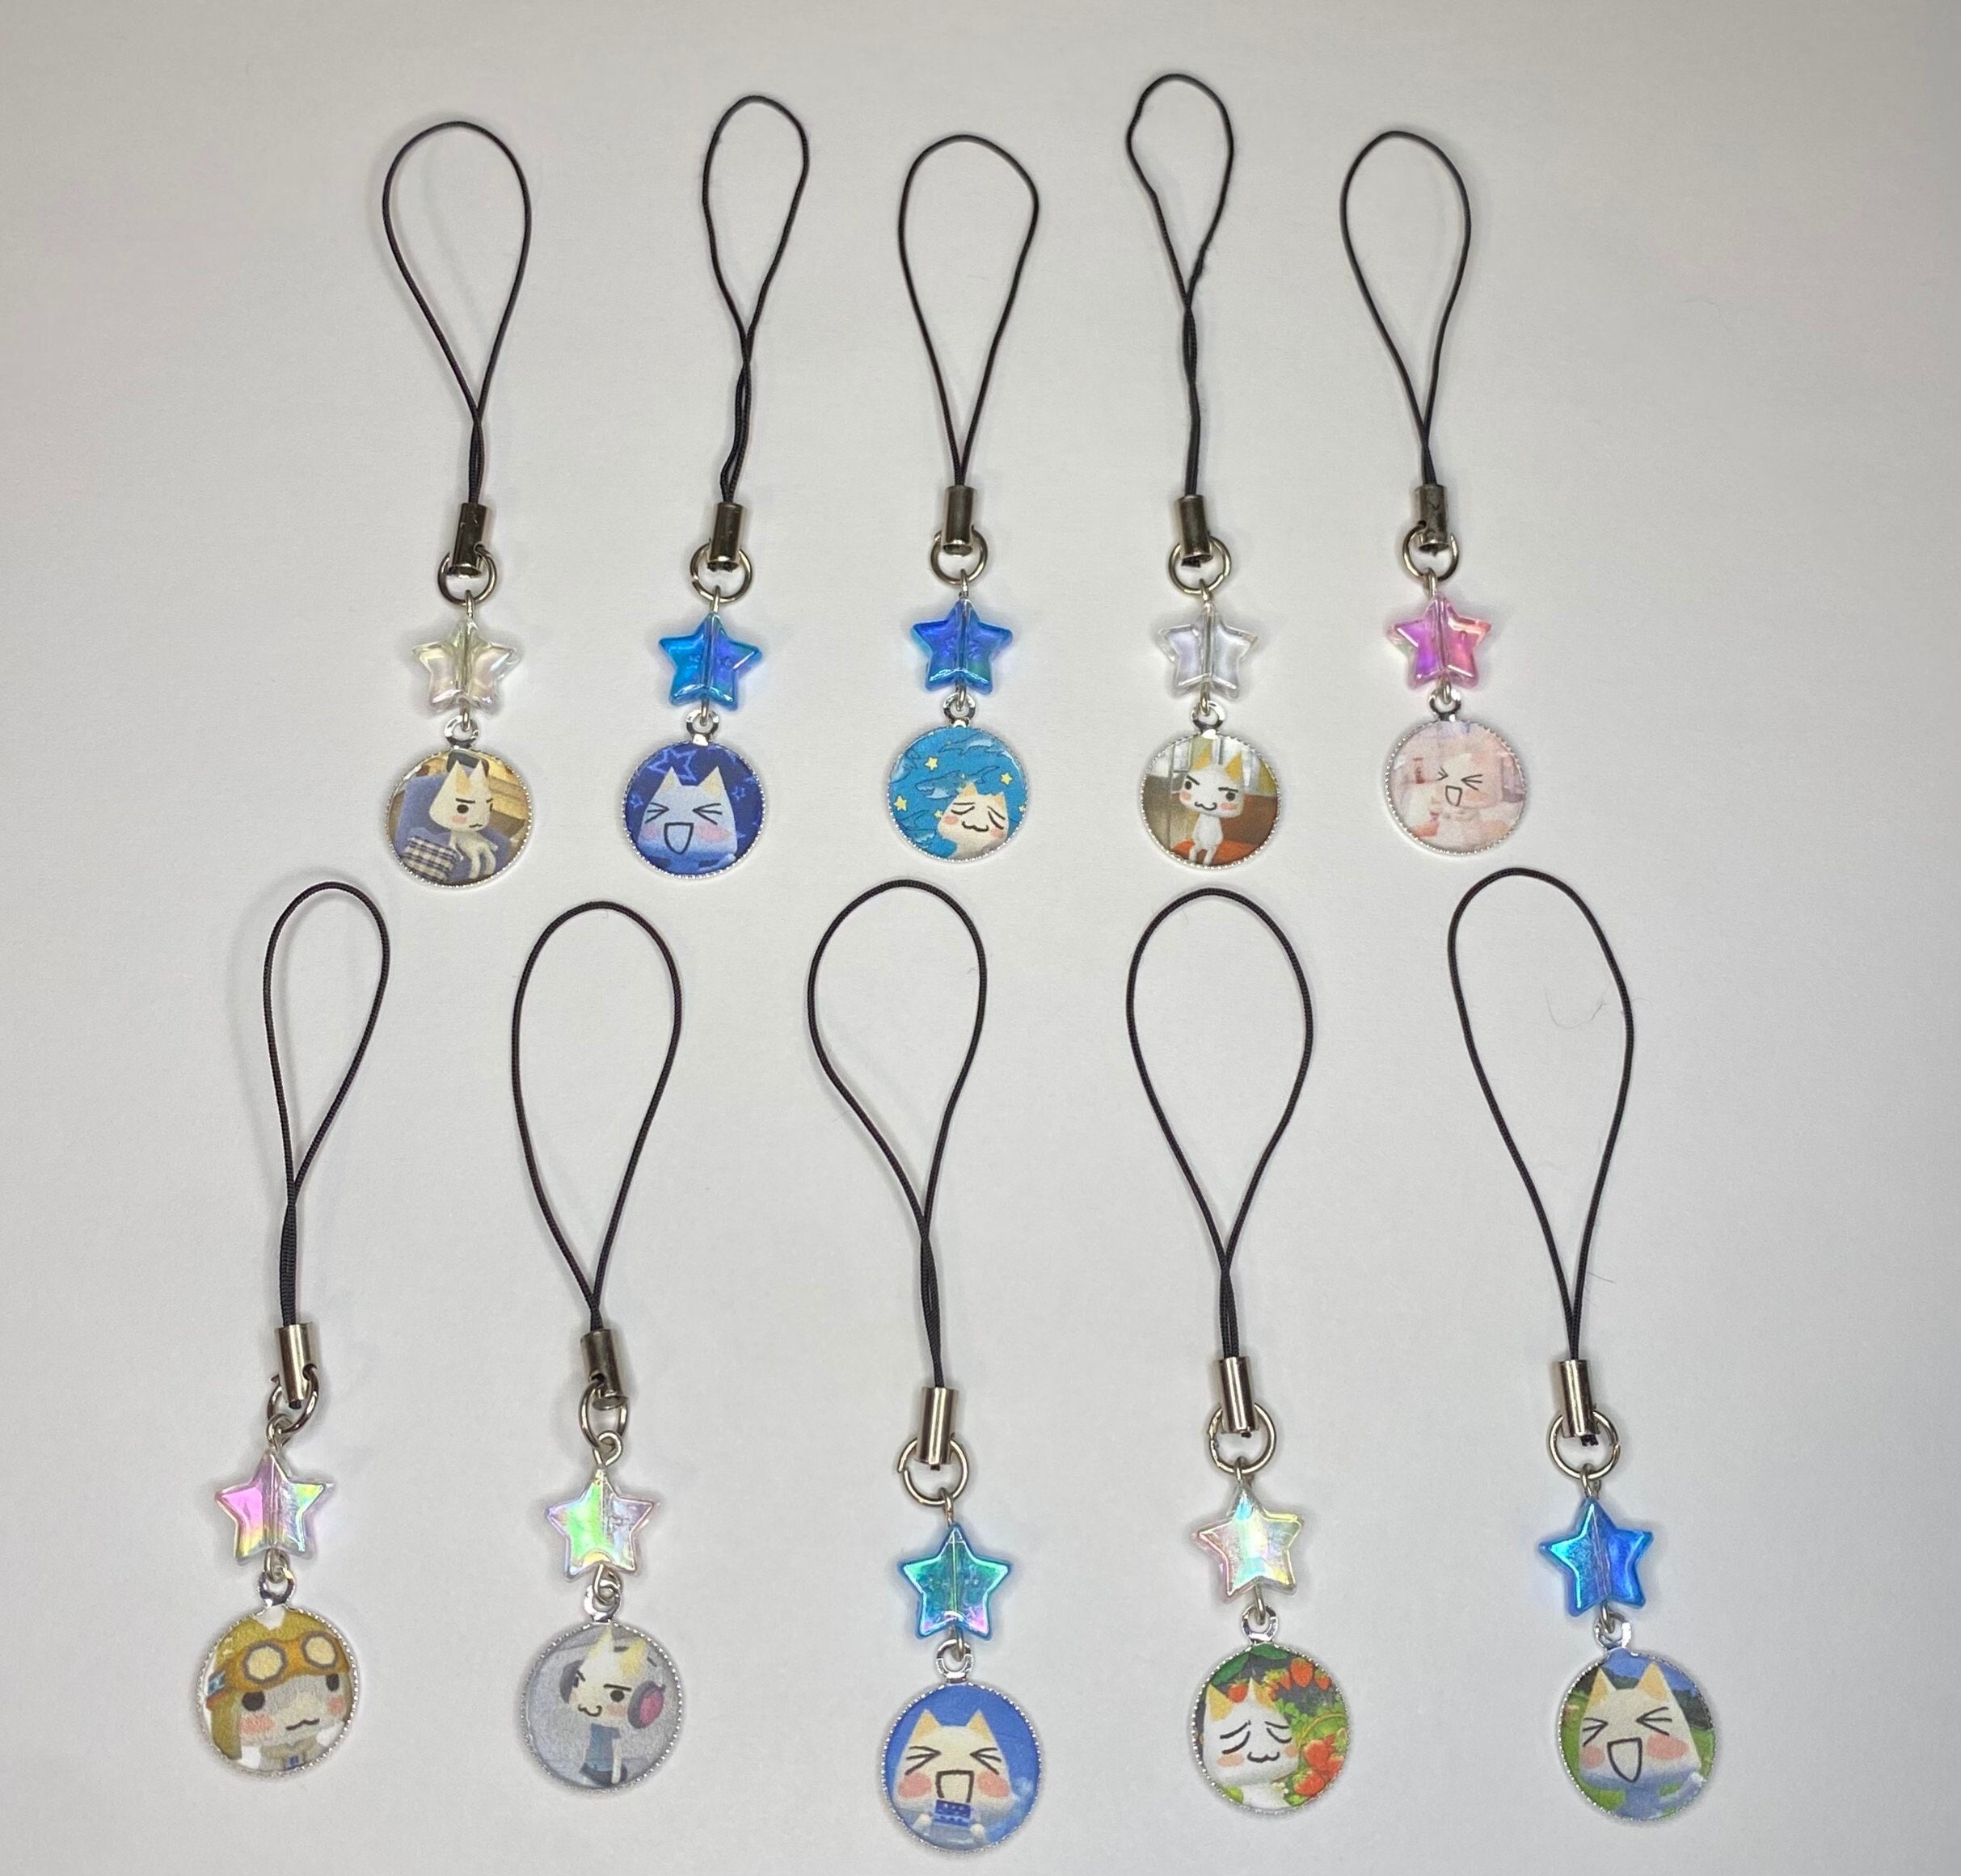 Necklace Silver Angel Heart Cinnamoroll Sanrio Characters - Meccha